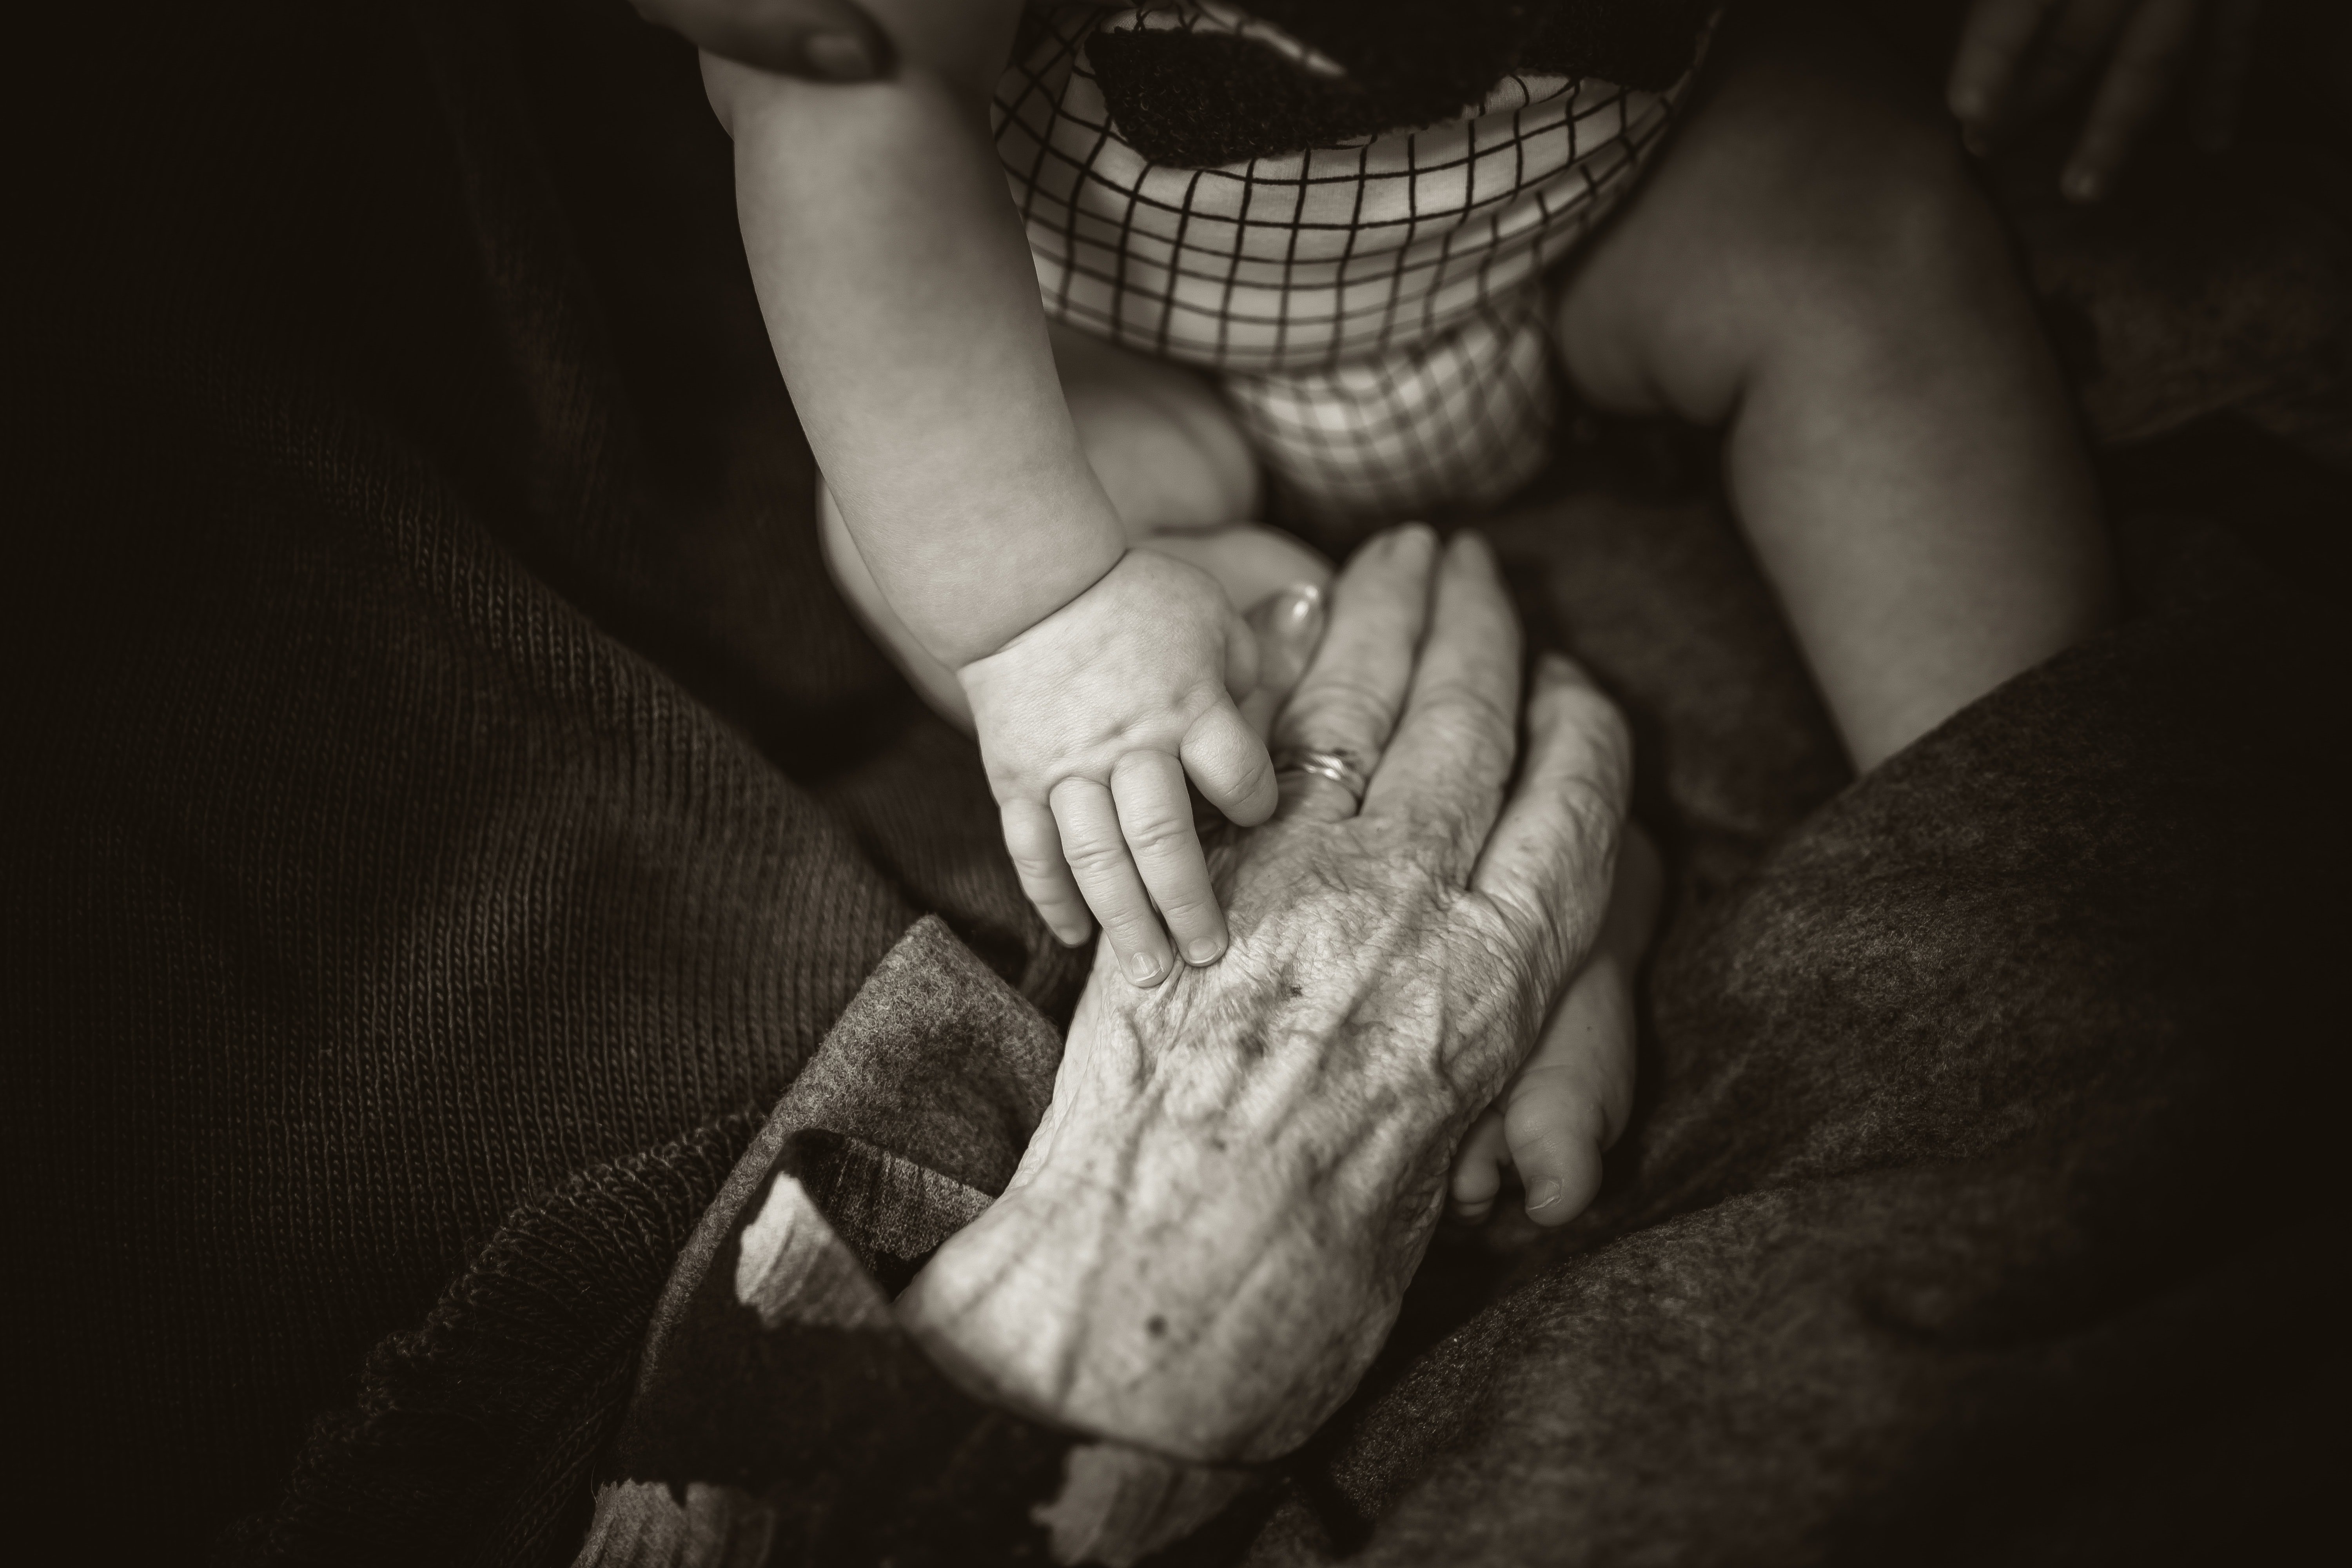 The old lady tries to sneak away with the OP's baby | Photo: Unsplash 